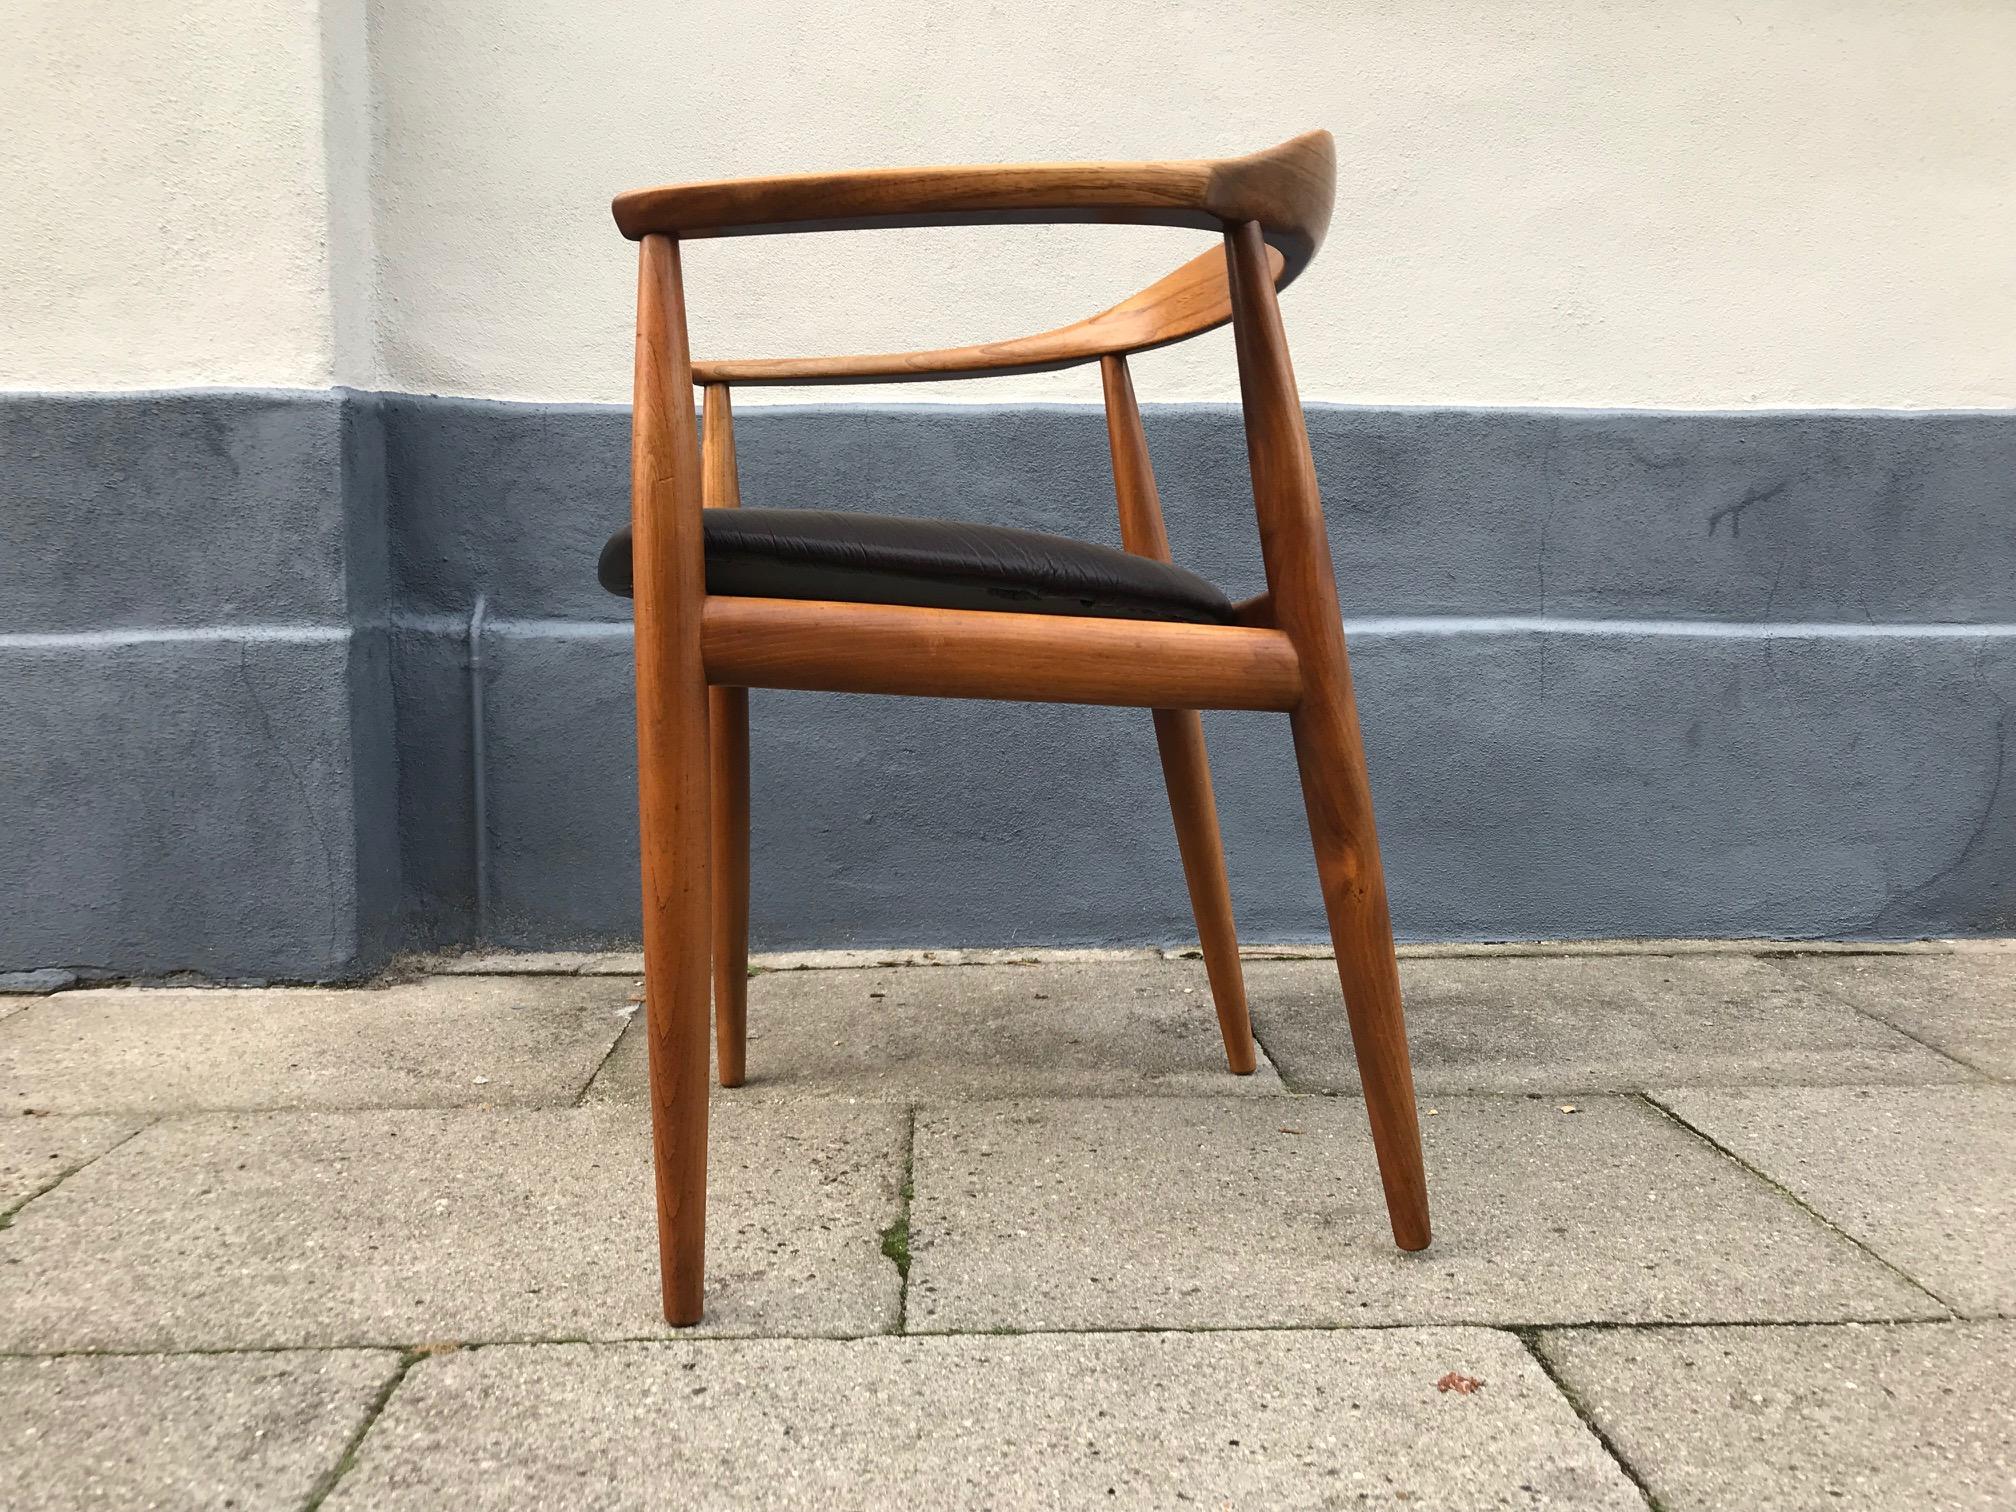 A Sculptural Danish armchair in elm designed by Illum Wikkelsø for Cabinetmaker Niels Eilersen. It was made in Denmark during the 1950s. It has been reupholstered with dark brown leather.